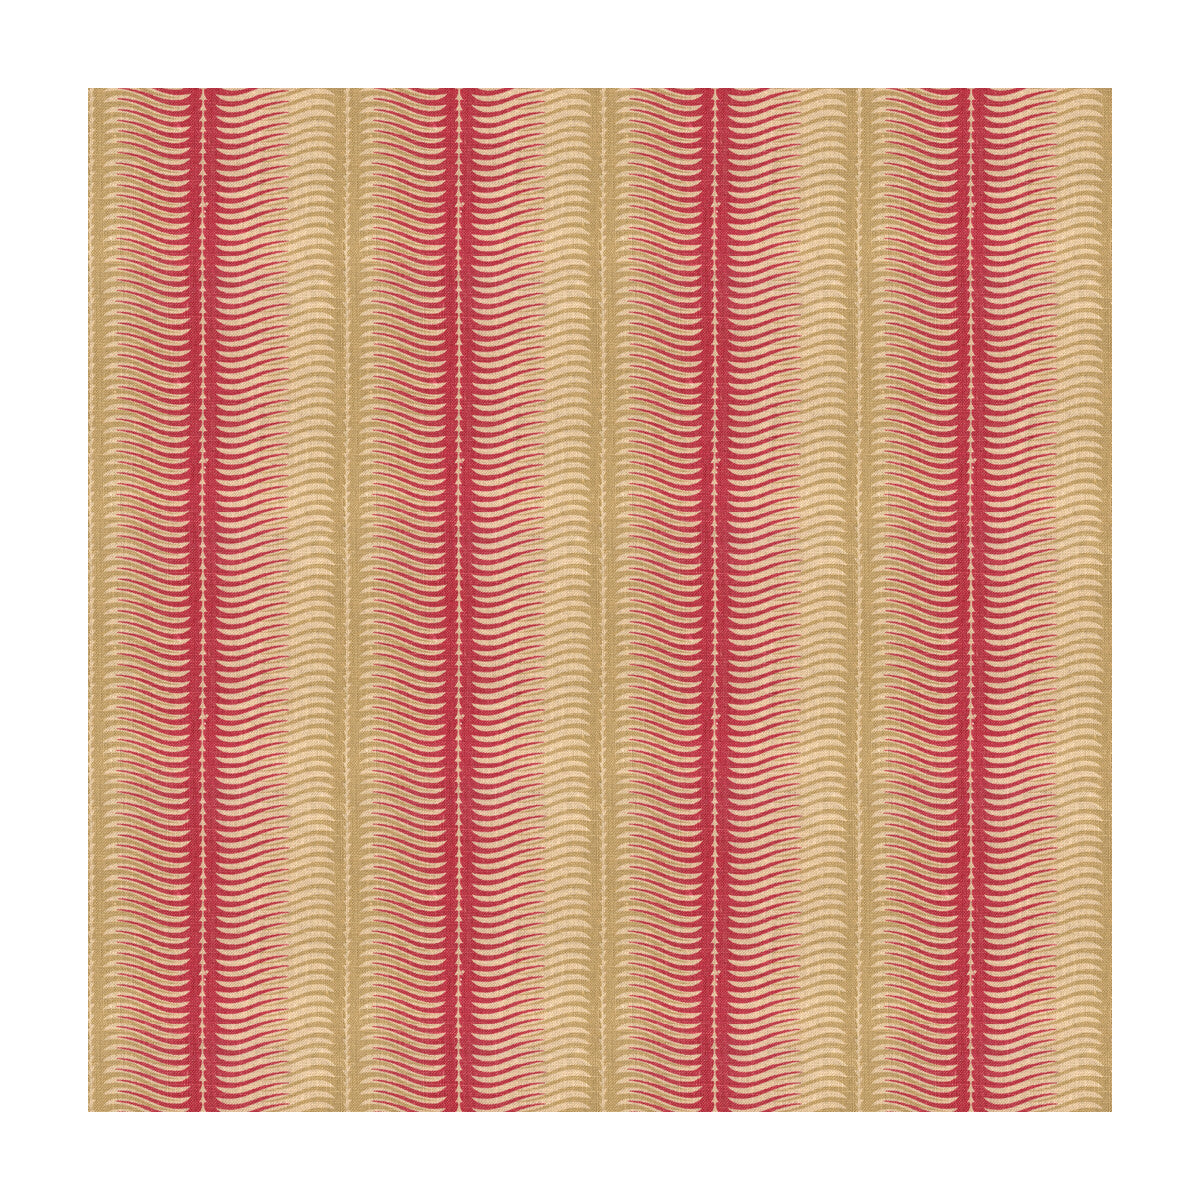 Stripes fabric in cerise color - pattern GWF-3509.7.0 - by Lee Jofa Modern in the Allegra Hicks Garden collection